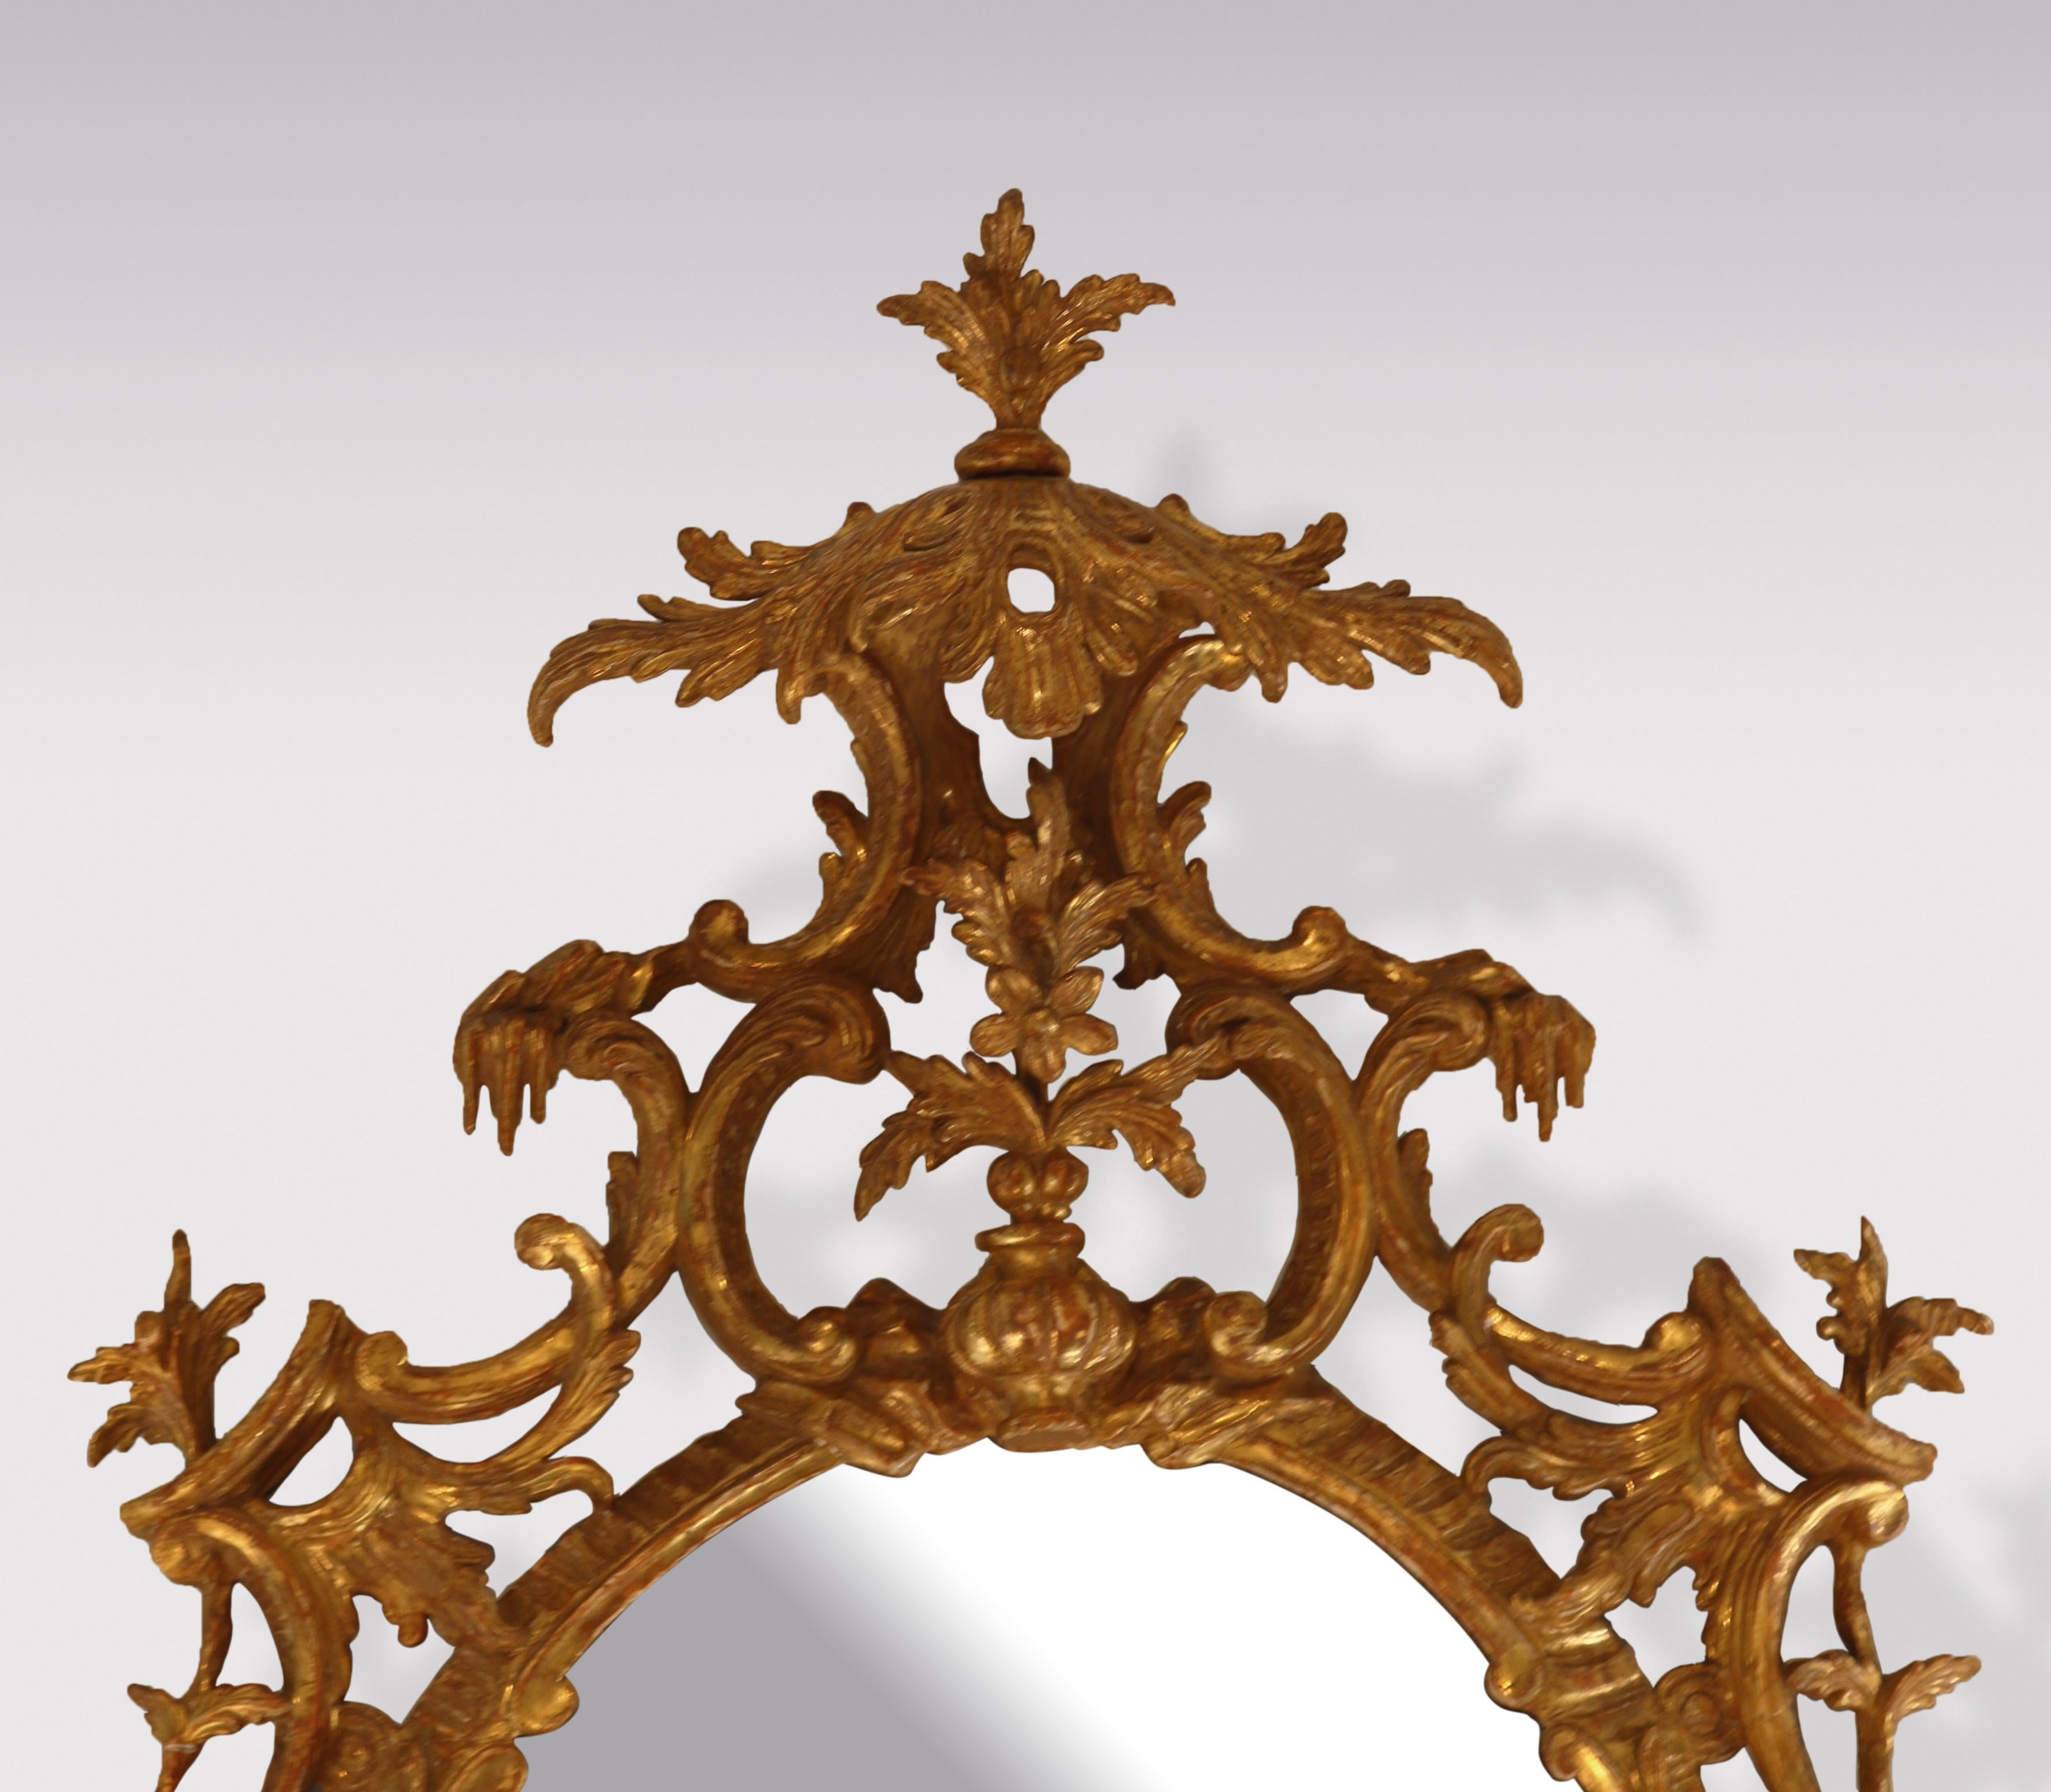 A fine quality Mid-18th century Chippendale period oval carved giltwood Mirror having leaf canopy cartouche above vase with flowers. The Mirror with intricate “C” scroll flower & acanthus carving and “icicle” detail with “C” scroll cartouche.